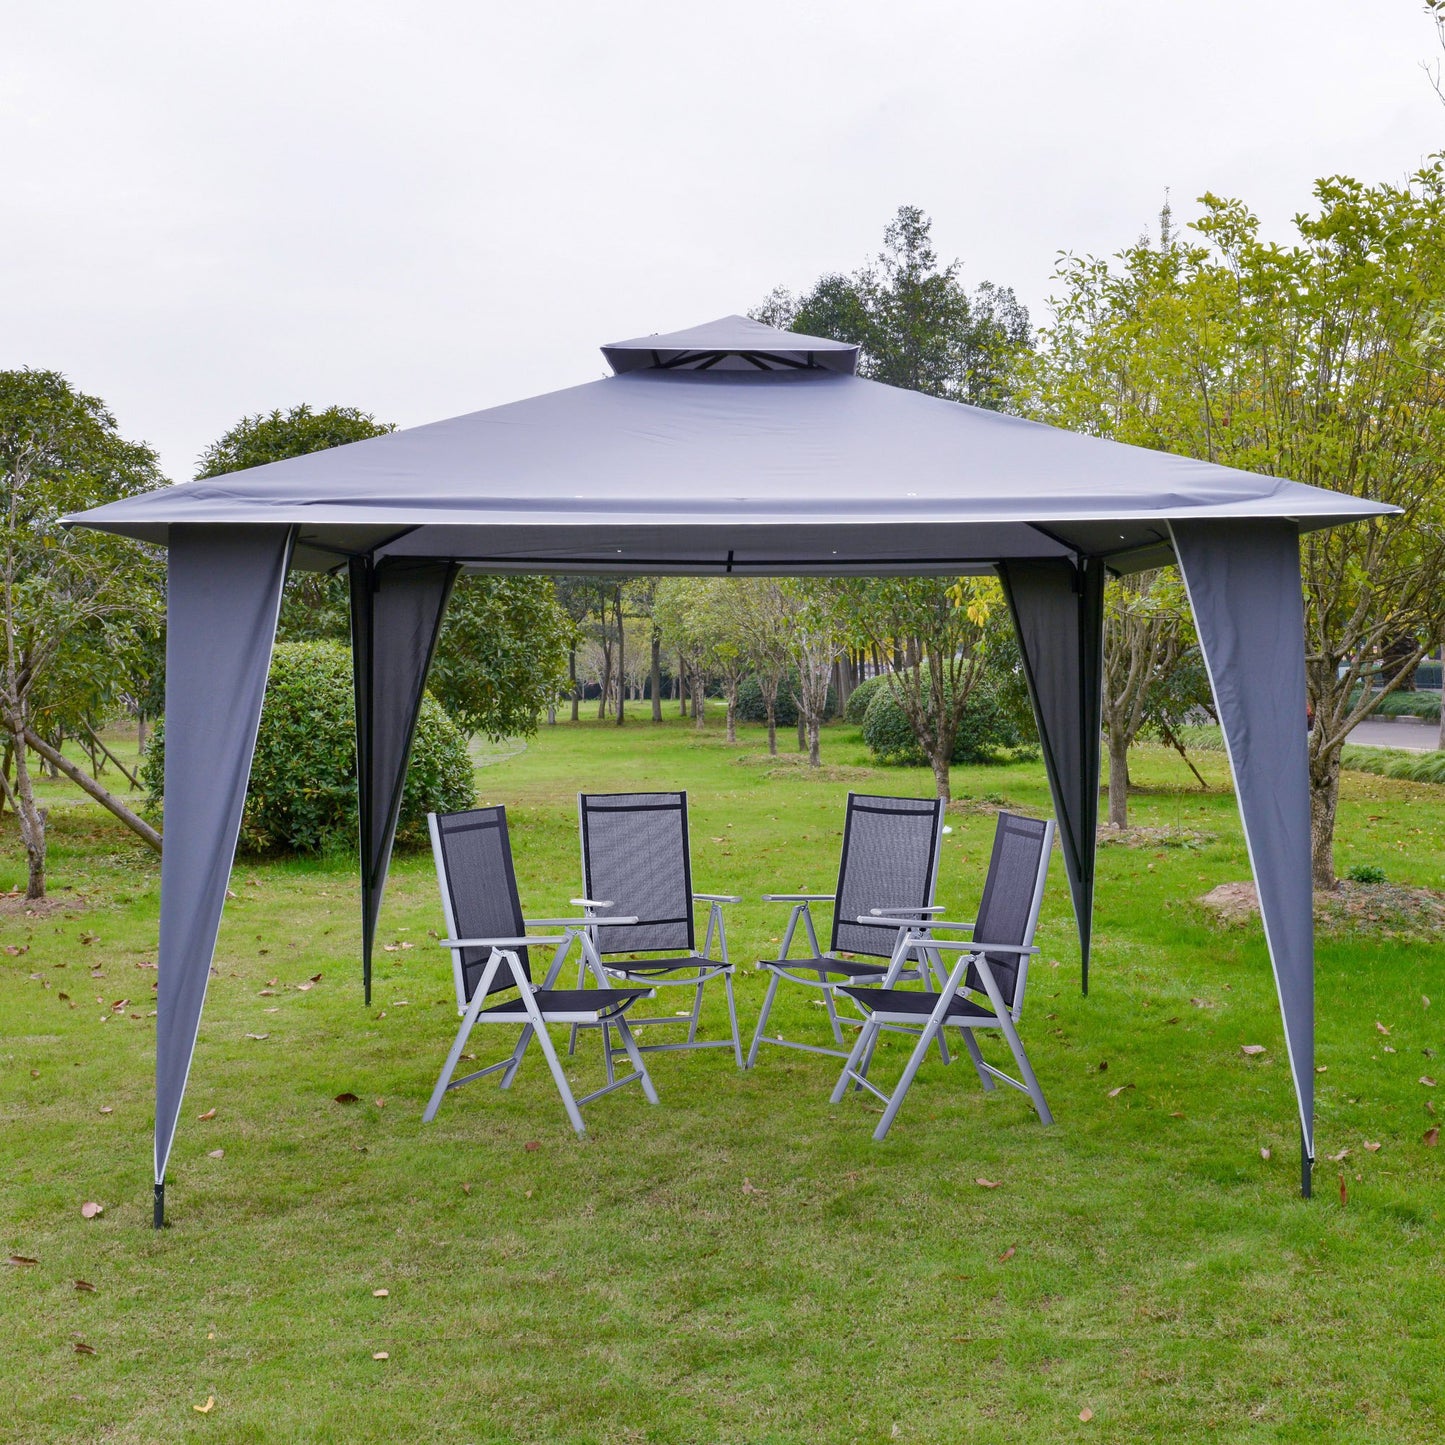 Outsunny 3.5x3.5m Side-Less Outdoor Canopy Tent Gazebo w/ 2-Tier Roof Steel Frame Grey